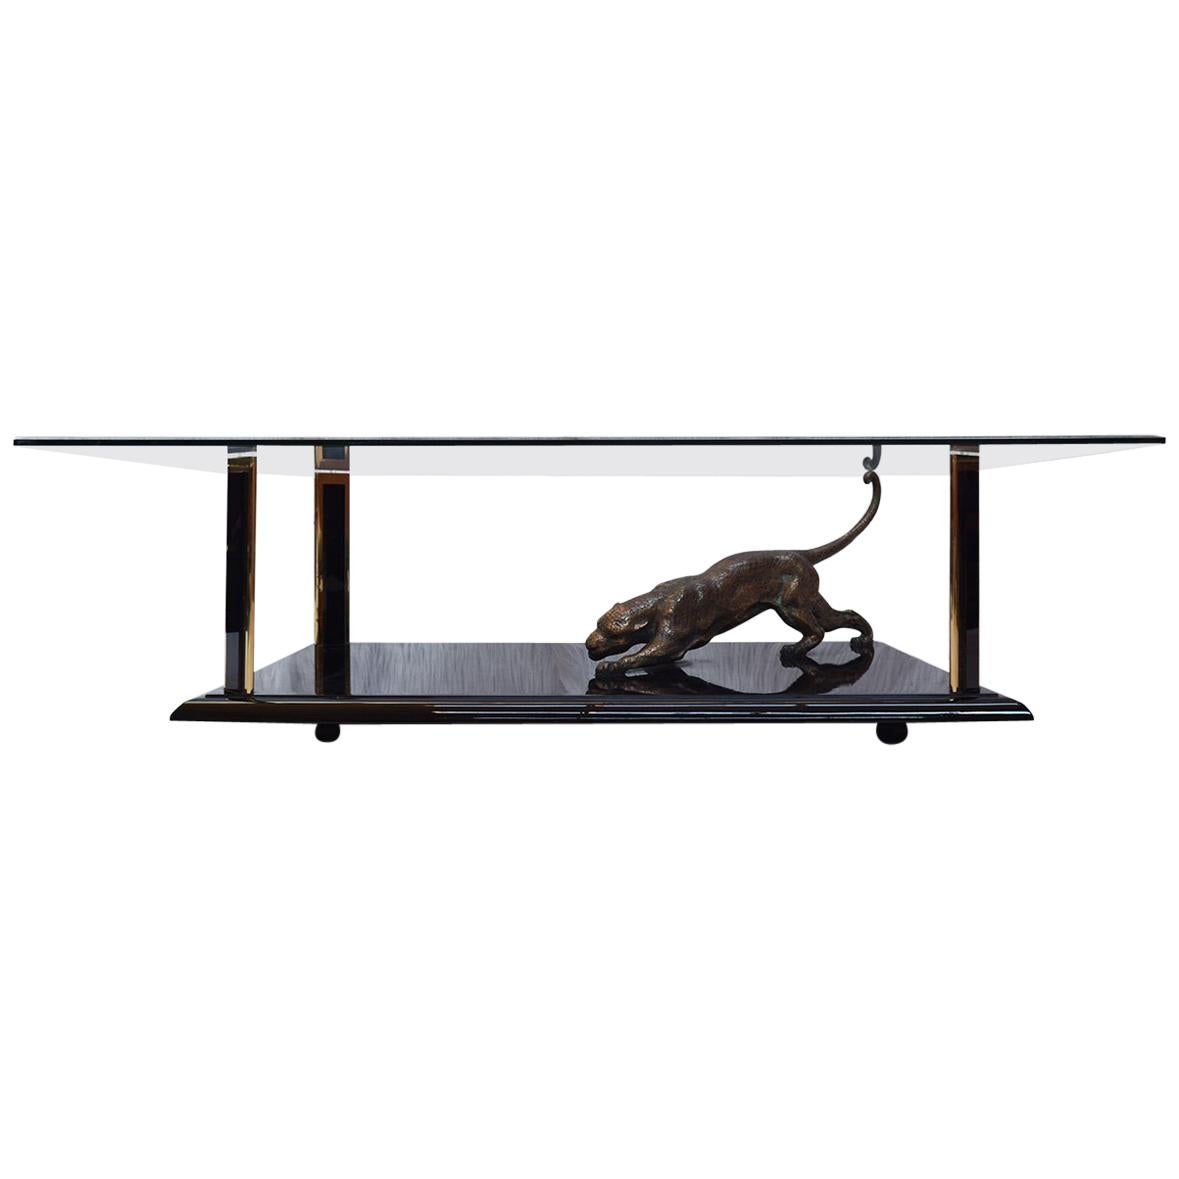 Rare Bronze Sculptural Panther and Brass Coffee table by Nicola Voci, 1970s For Sale